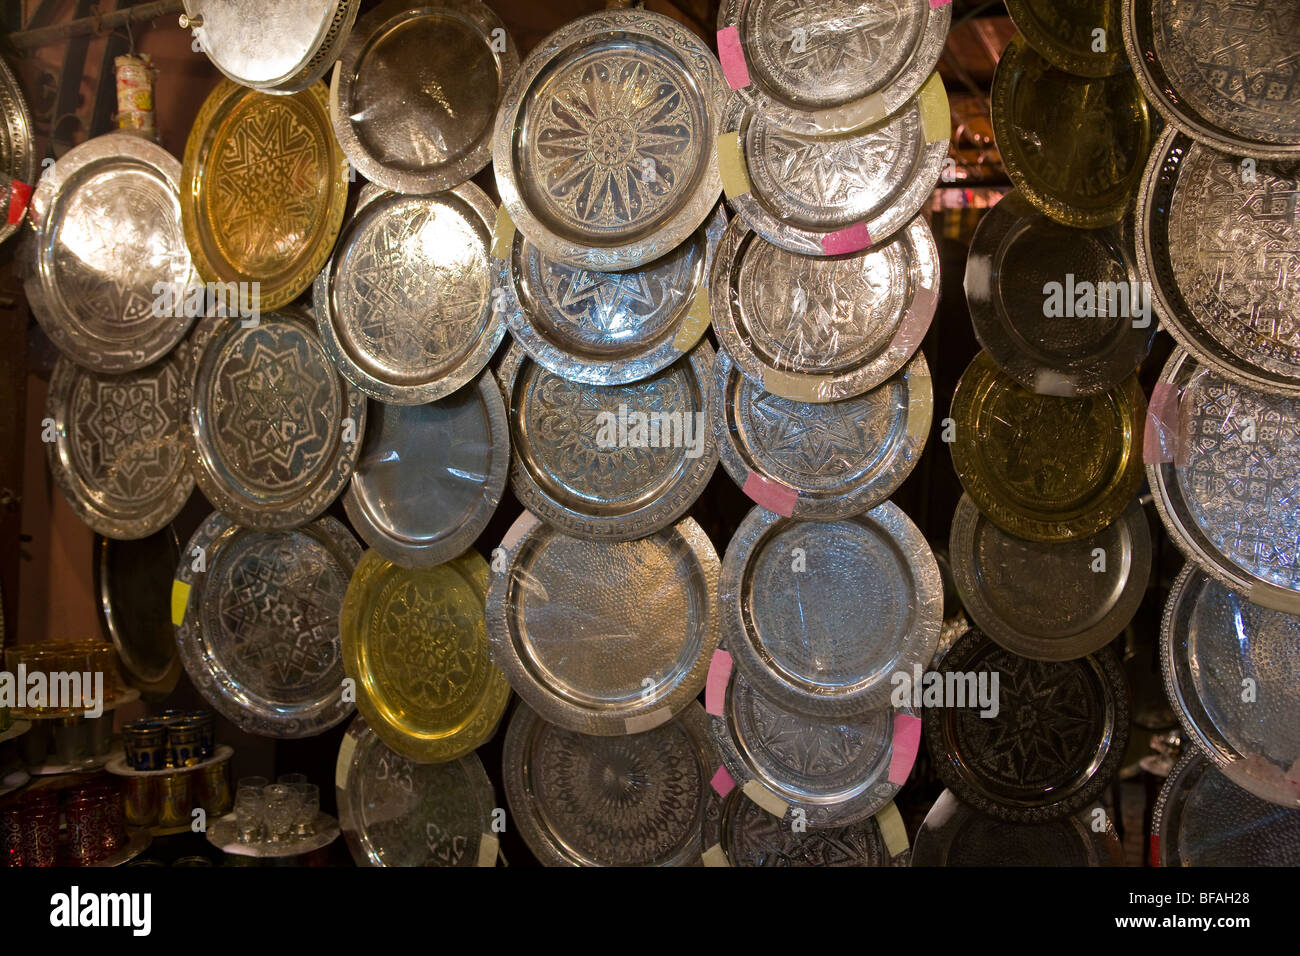 MARRAKESH, MOROCCO - silver items on sale at souq in medina. Stock Photo